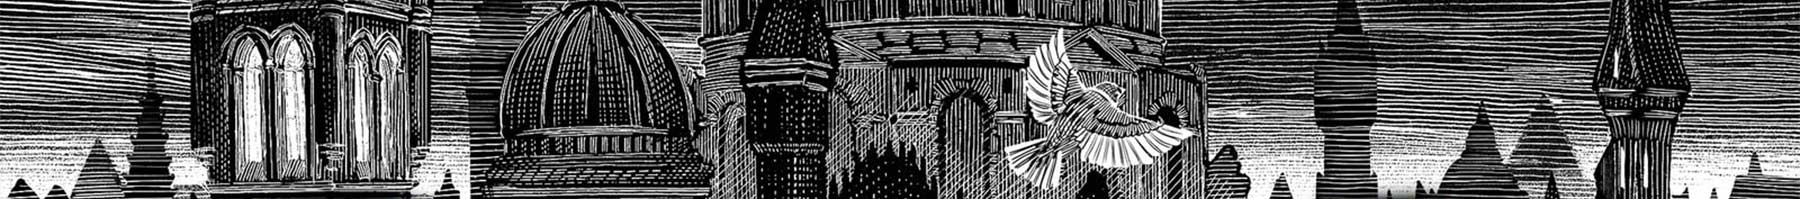 black and white illustration of a city